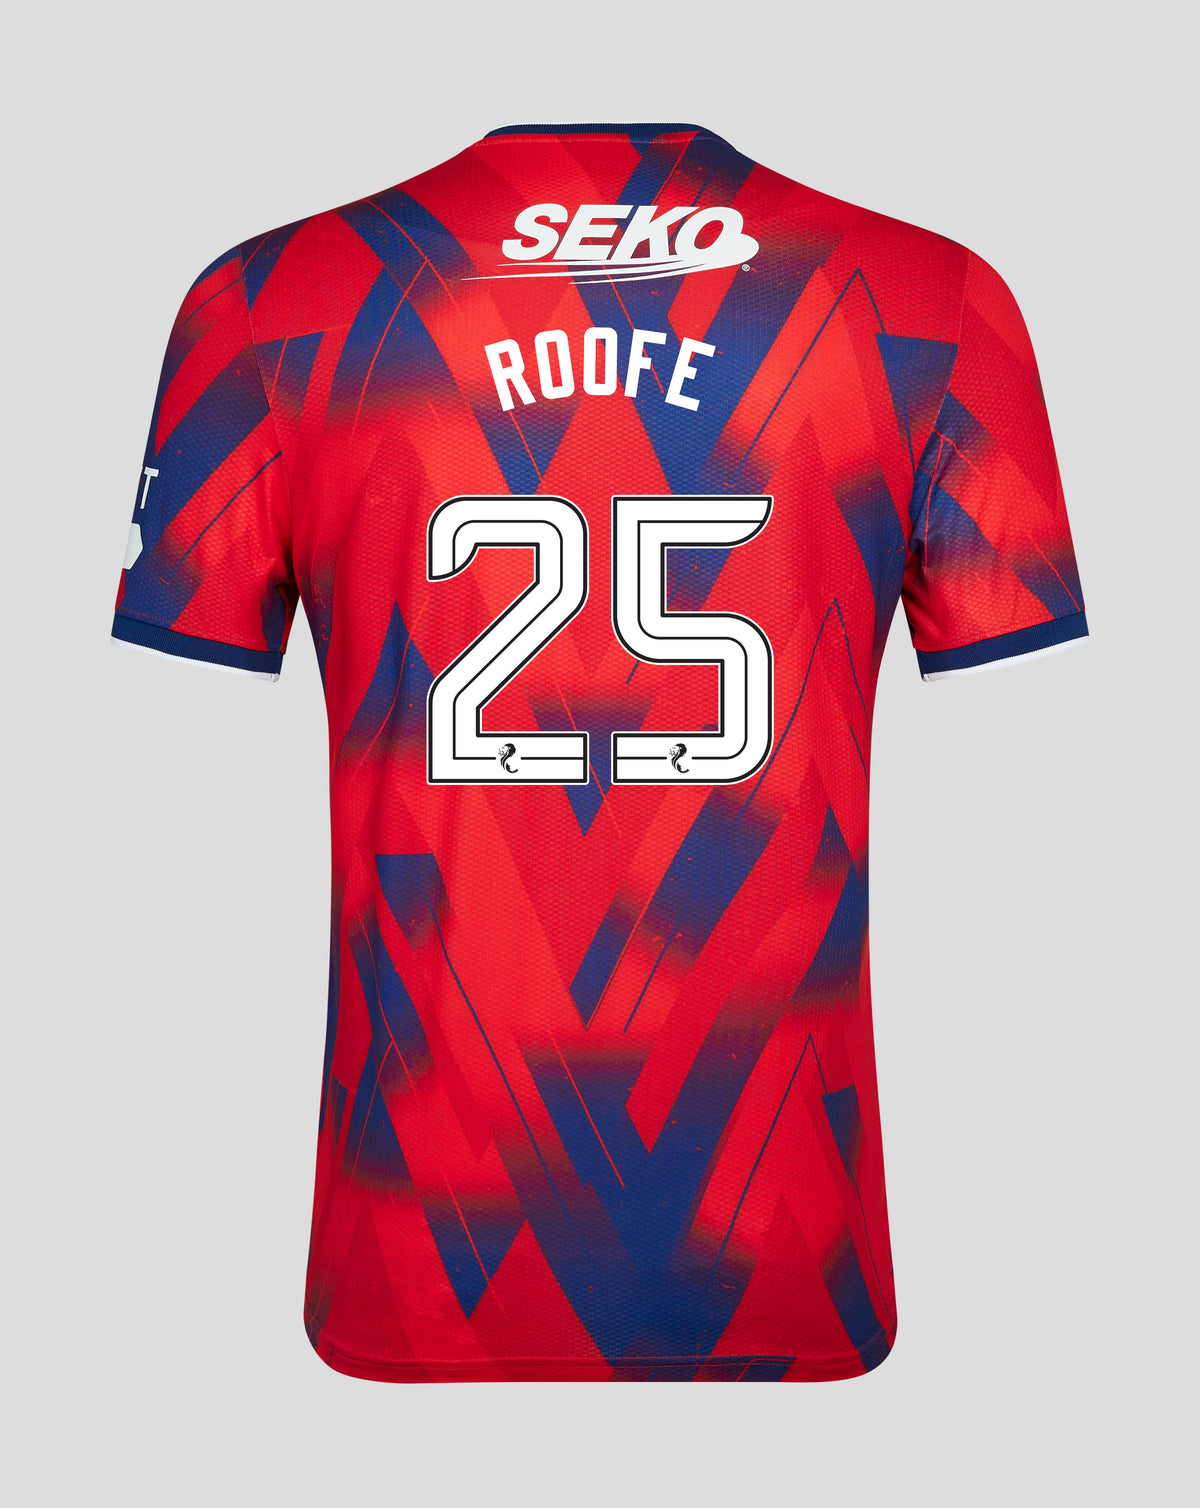 Roofe - Fourth Kit